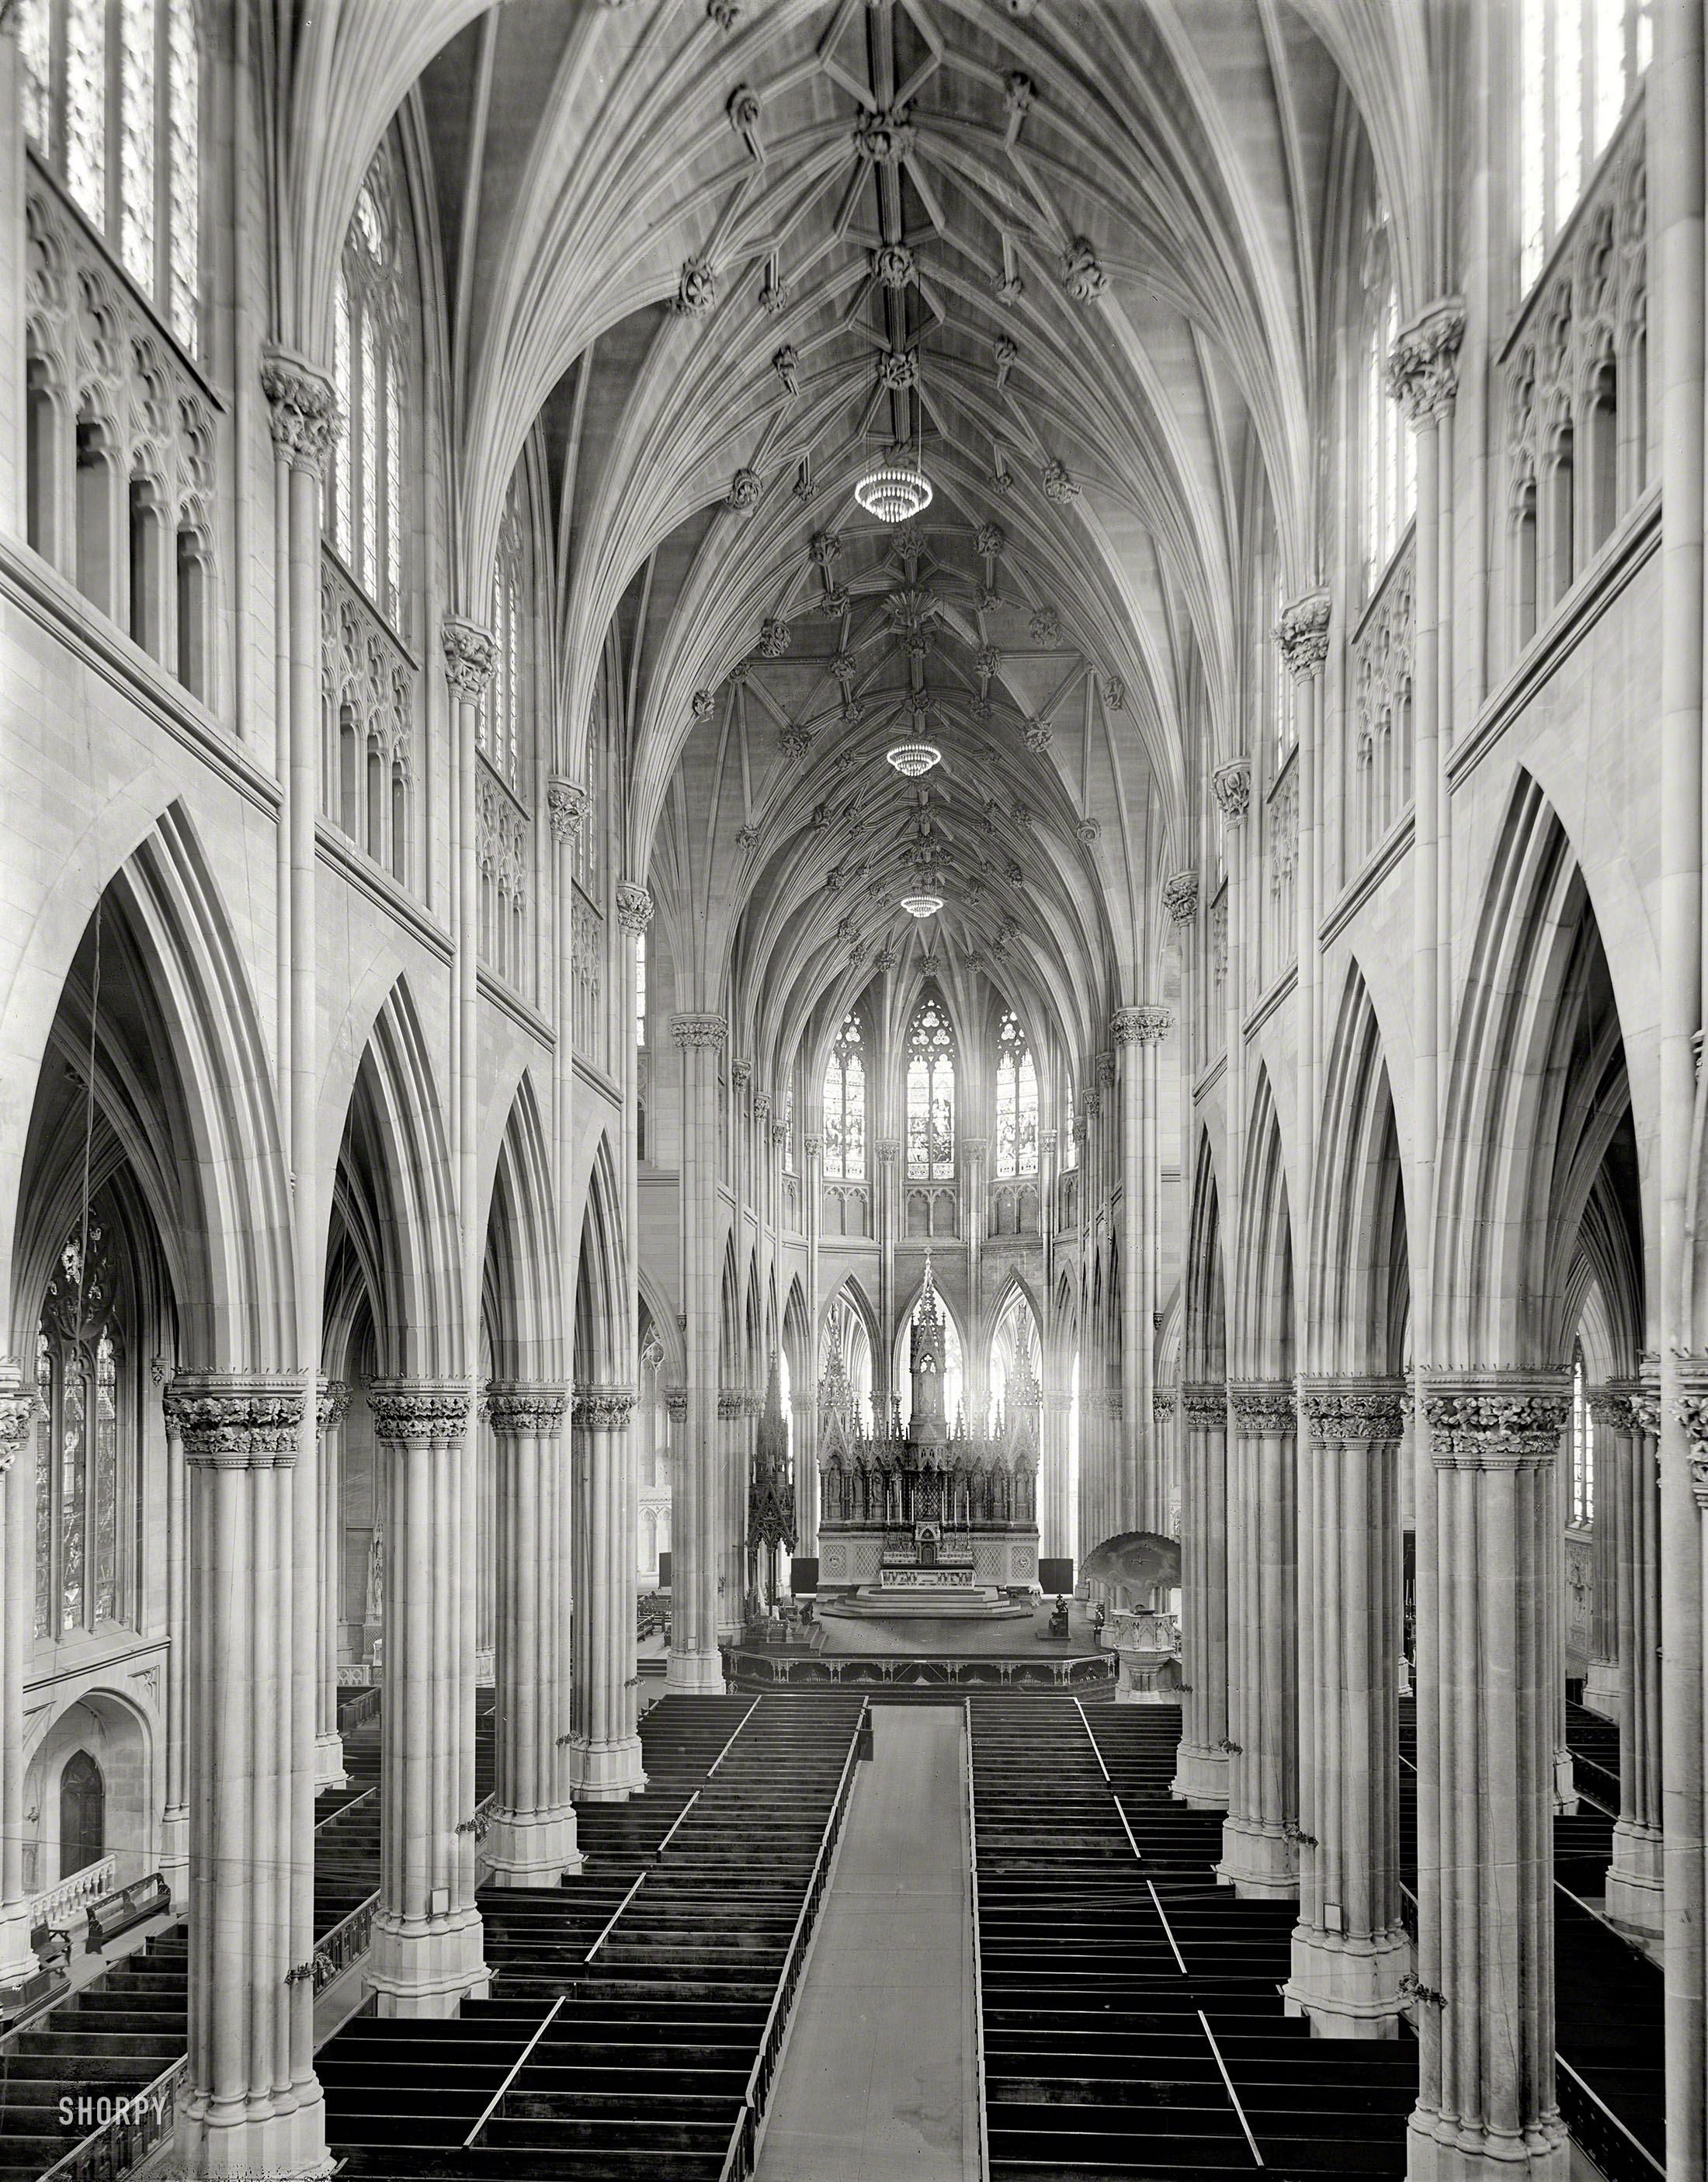 New York circa 1907. "Interior of St. Patrick's Cathedral." Faith and Begorrah! 8x10 inch glass negative, Detroit Publishing Company. View full size.